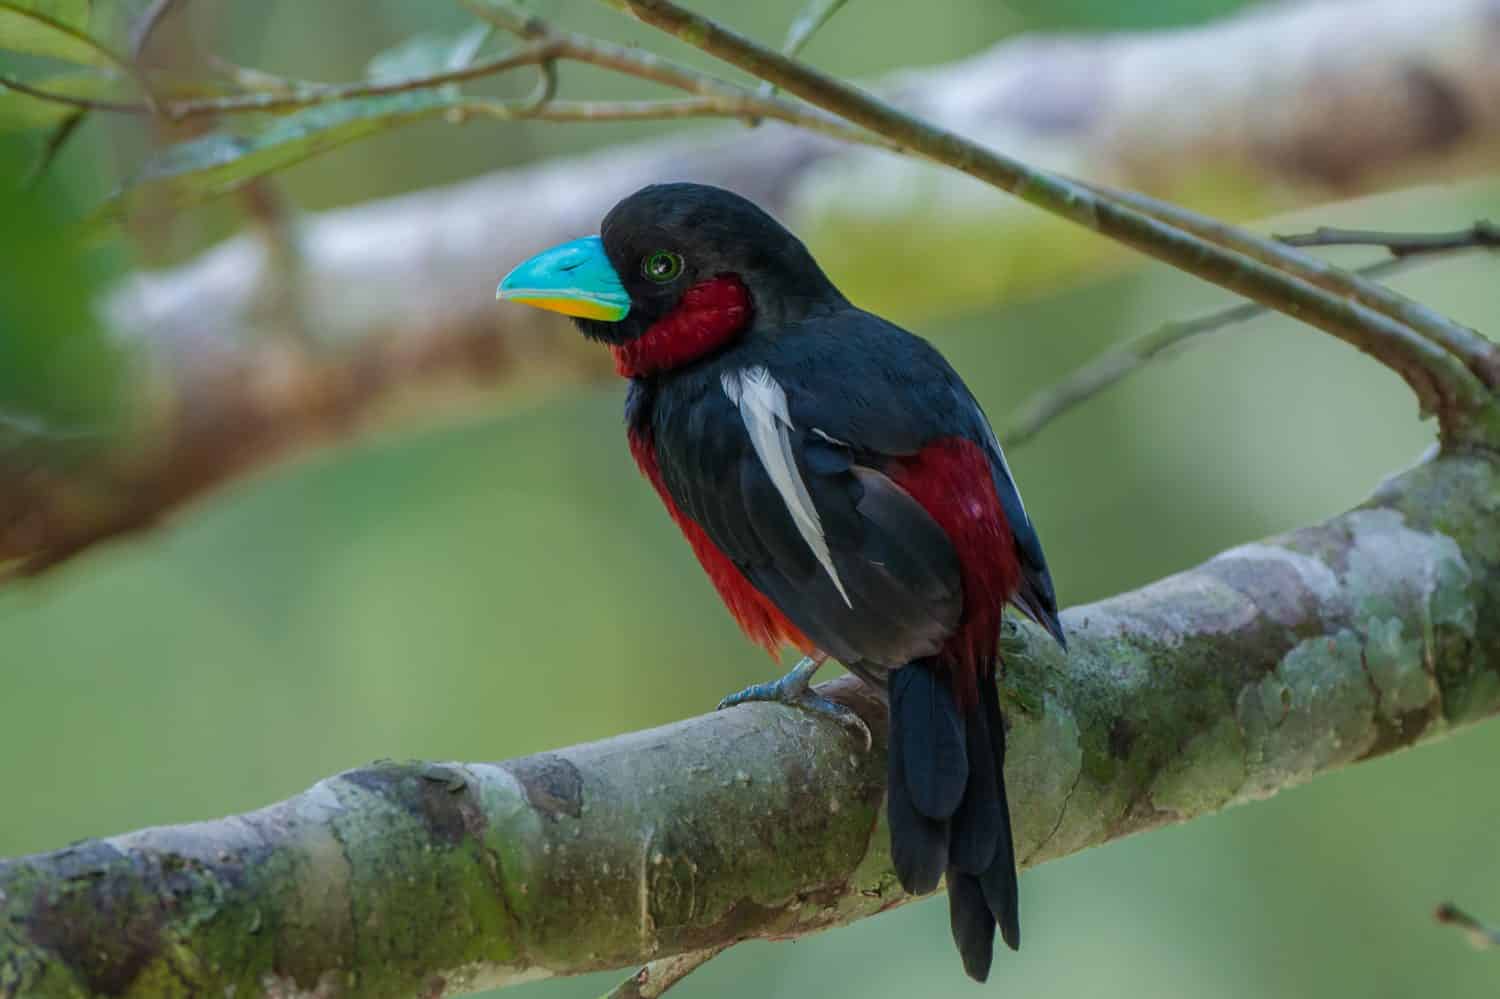 Black and Red Broadbillcommon braodbill can found at malaysia forest. this photo taken at Sepilok, Sandakan, sabah.